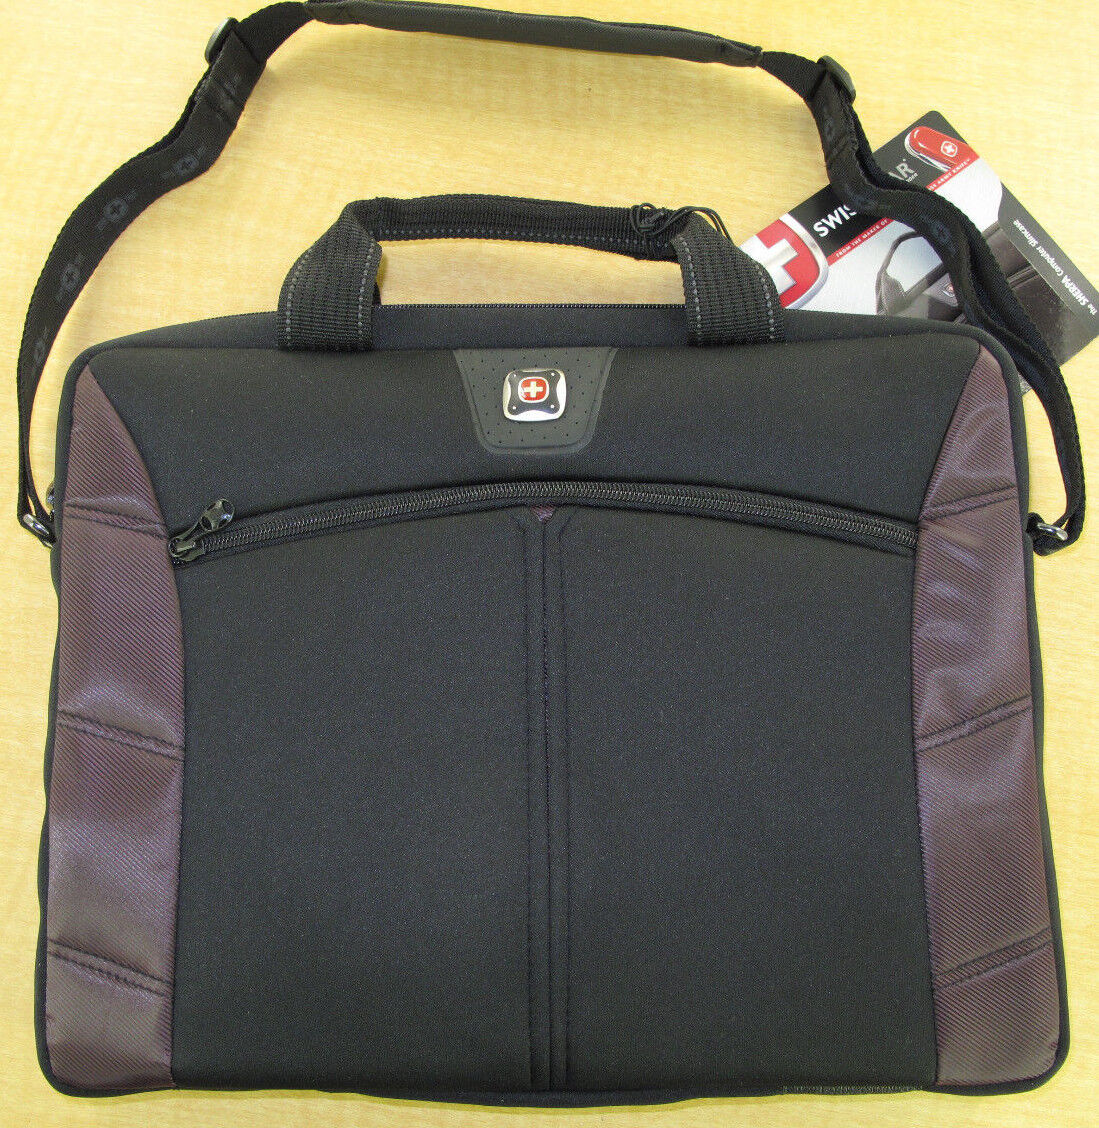 New Swiss Gear By Wenger 'Sherpa' Computer Slimcase - Black/Plum